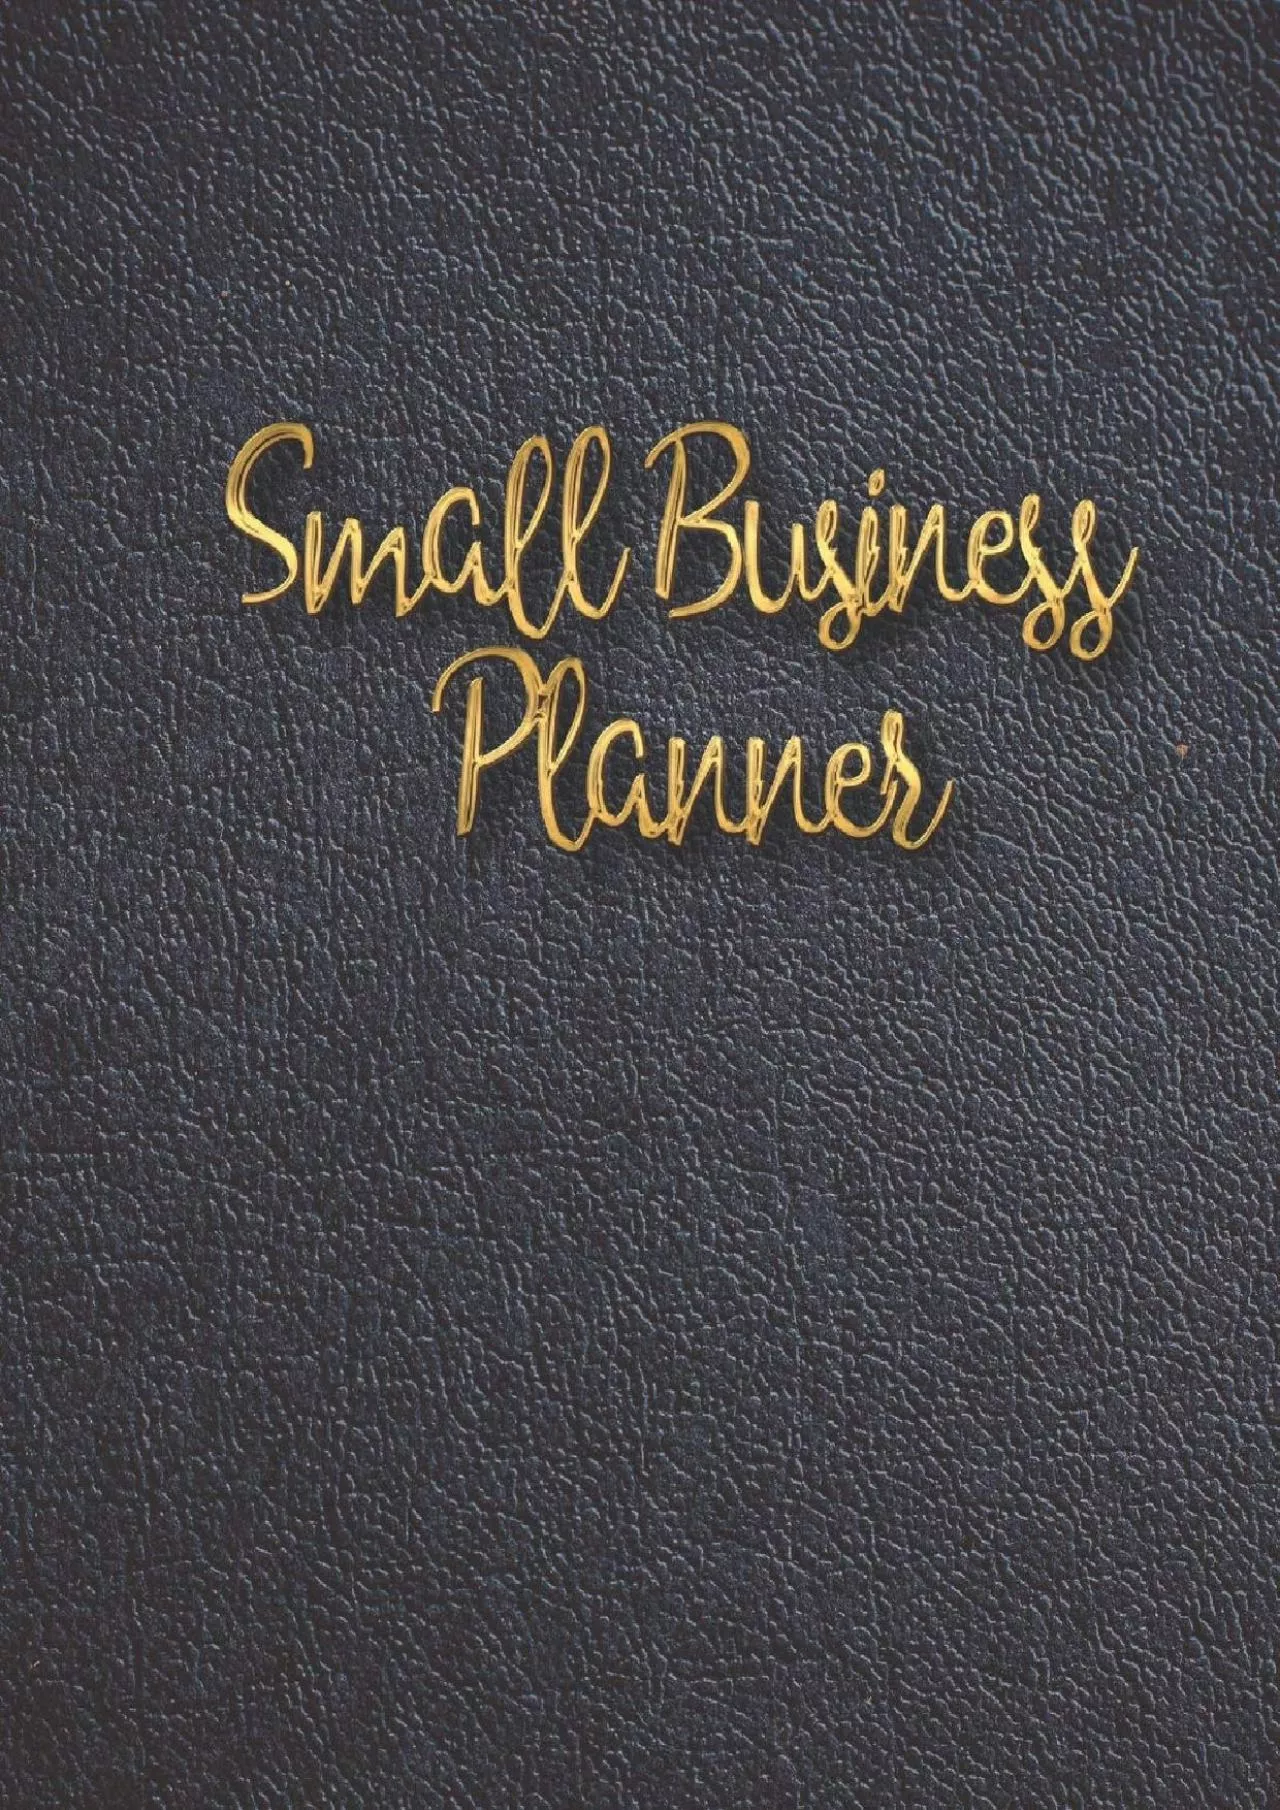 (EBOOK)-Small Business Planner: Monthly Planner and organizer with sales, expenses, budget,